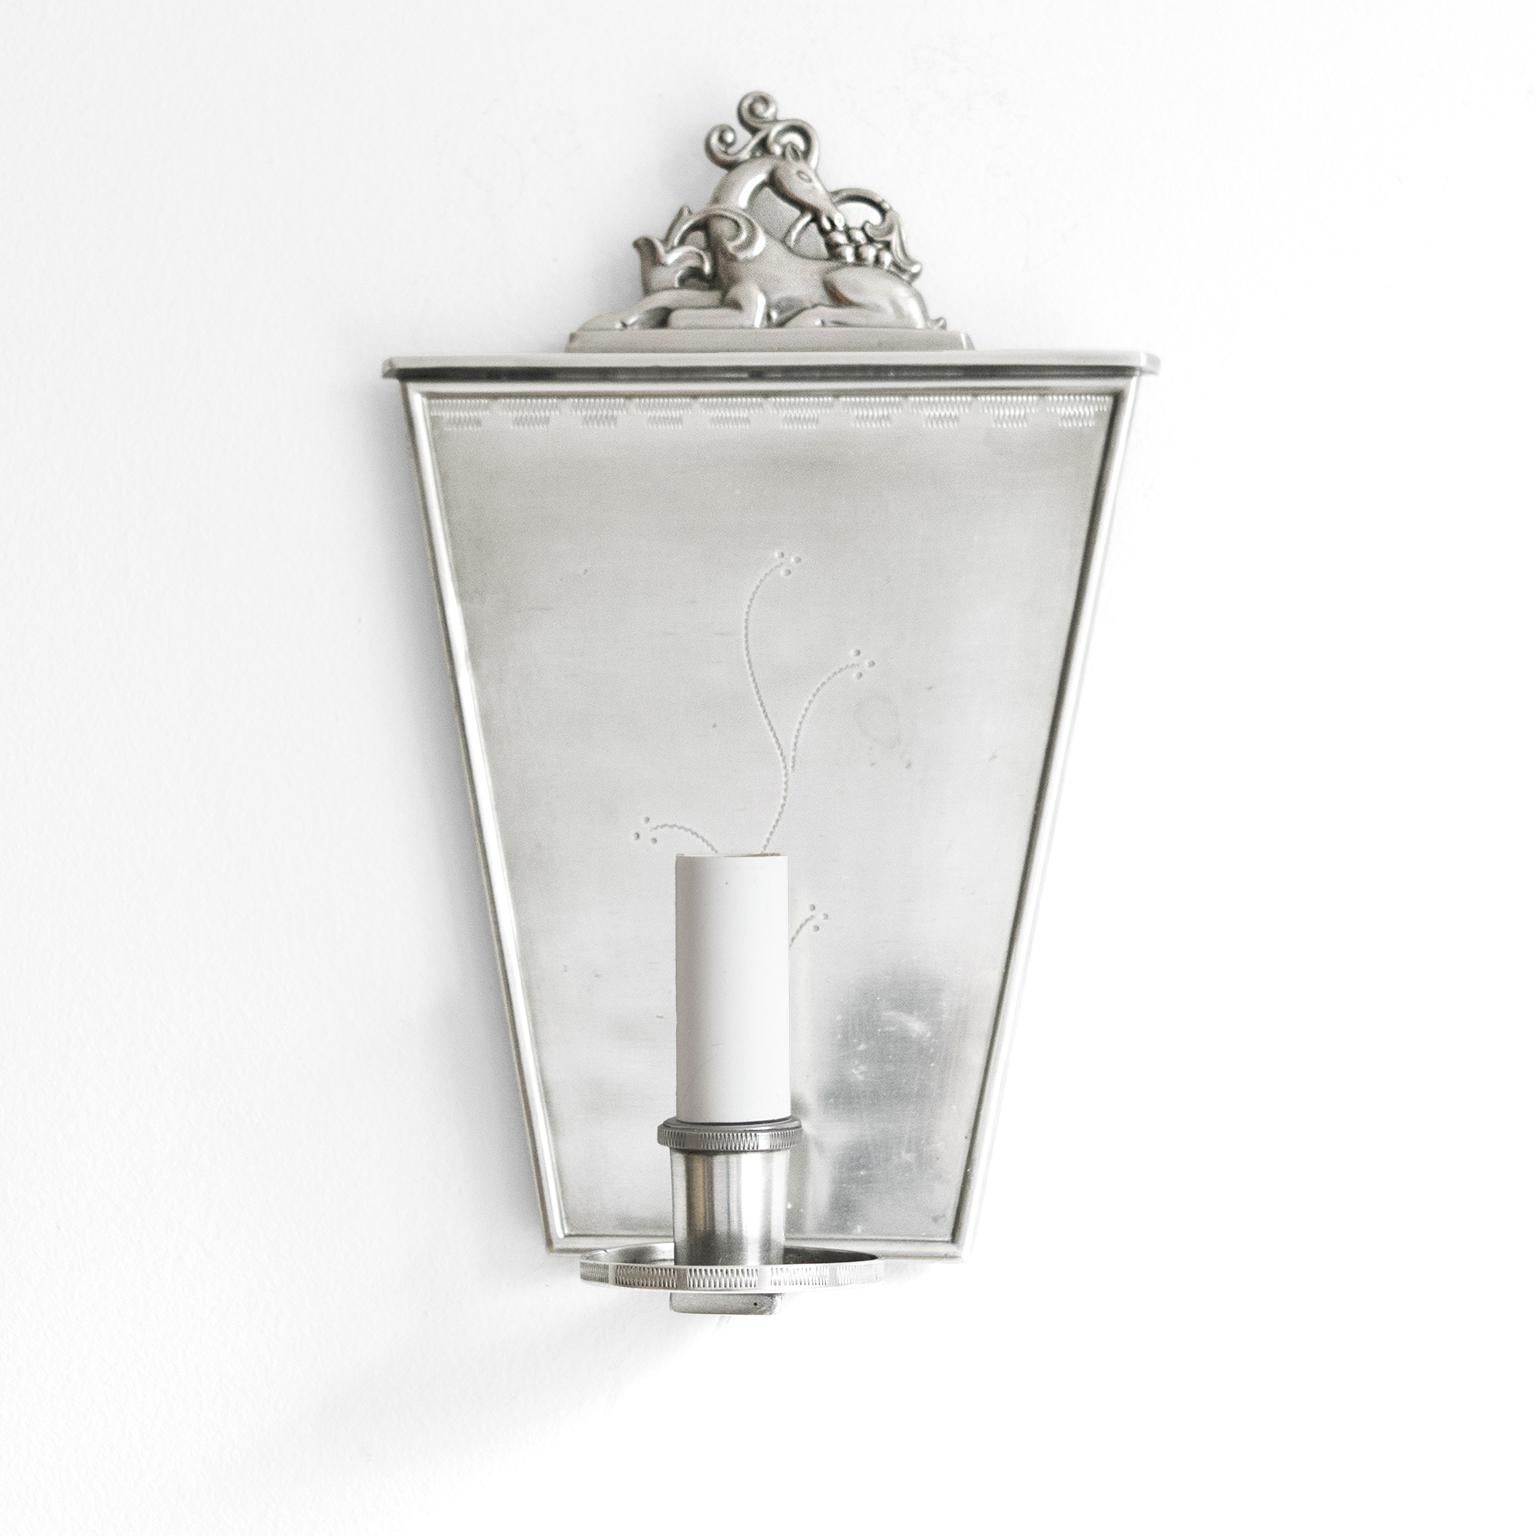 Lacquered Pair of Swedish Grace polished Pewter Sconces by, C.G. Hallberg, Stockholm For Sale